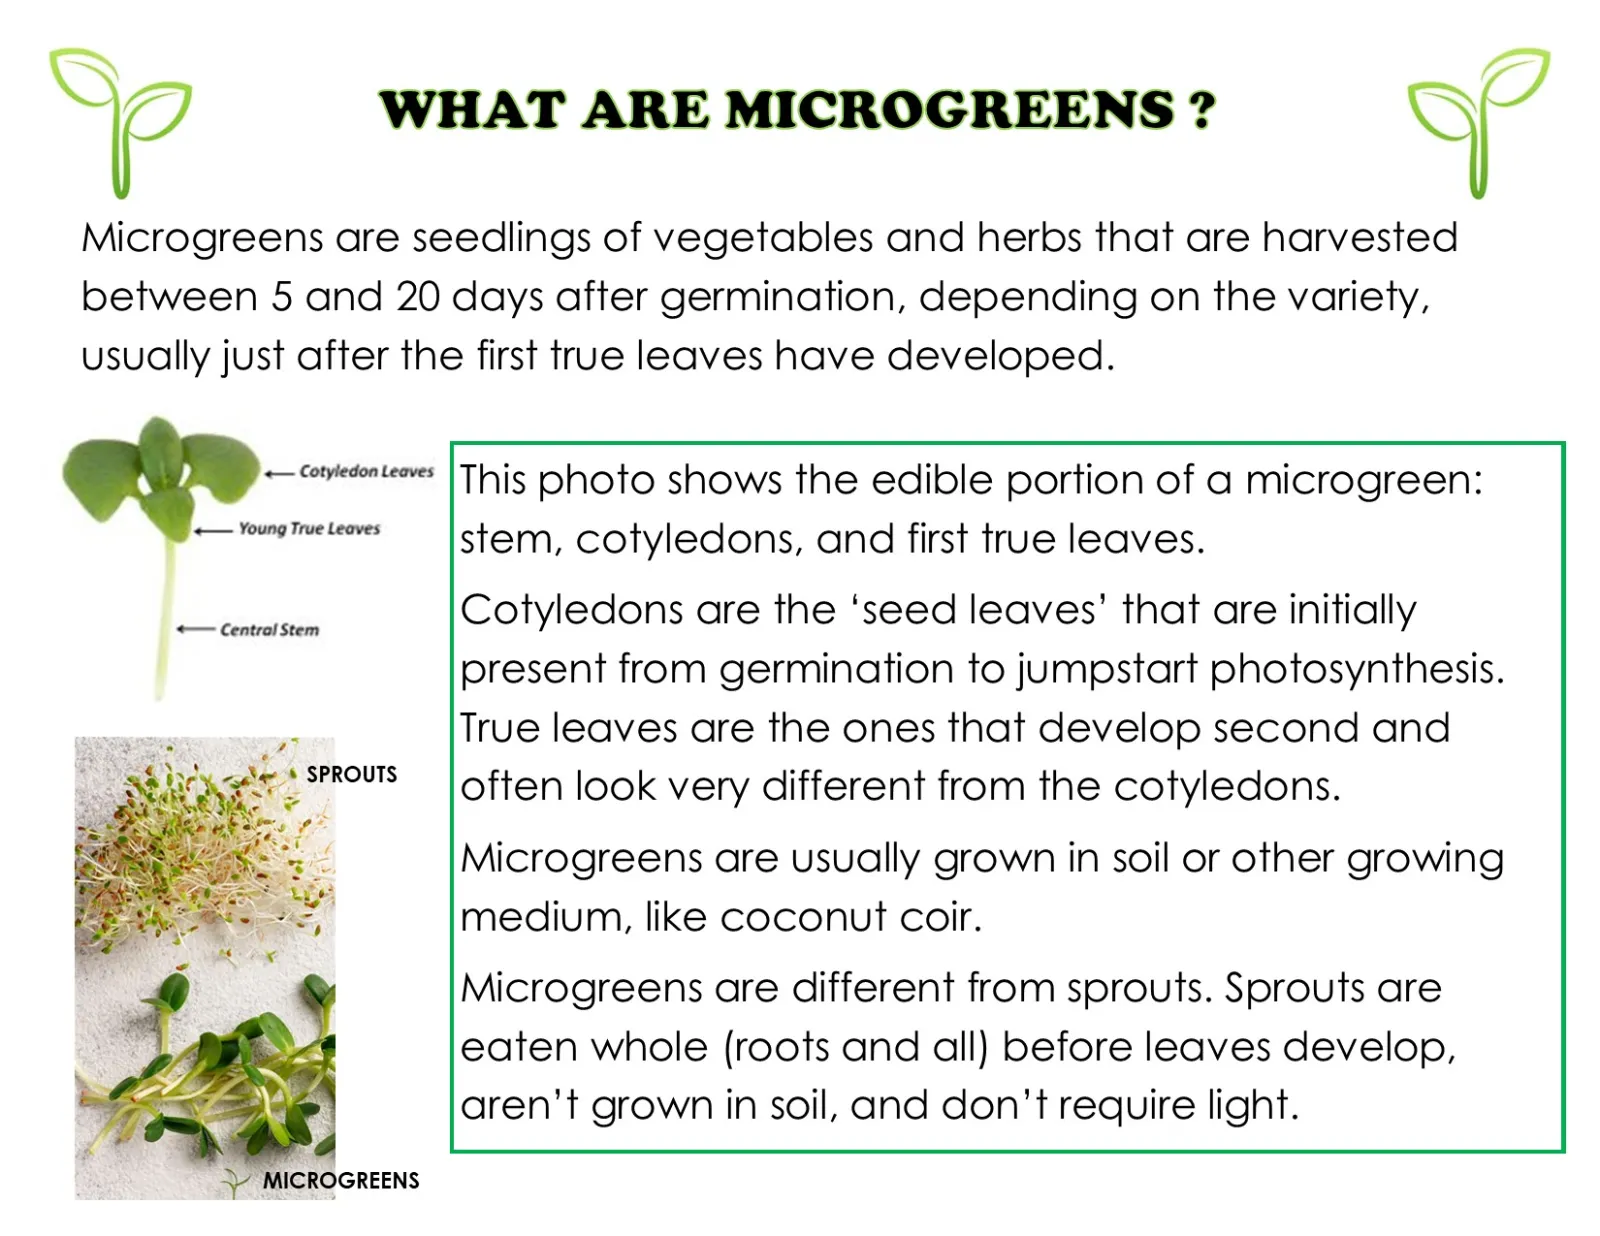 This is a wall of text about what microgreens are